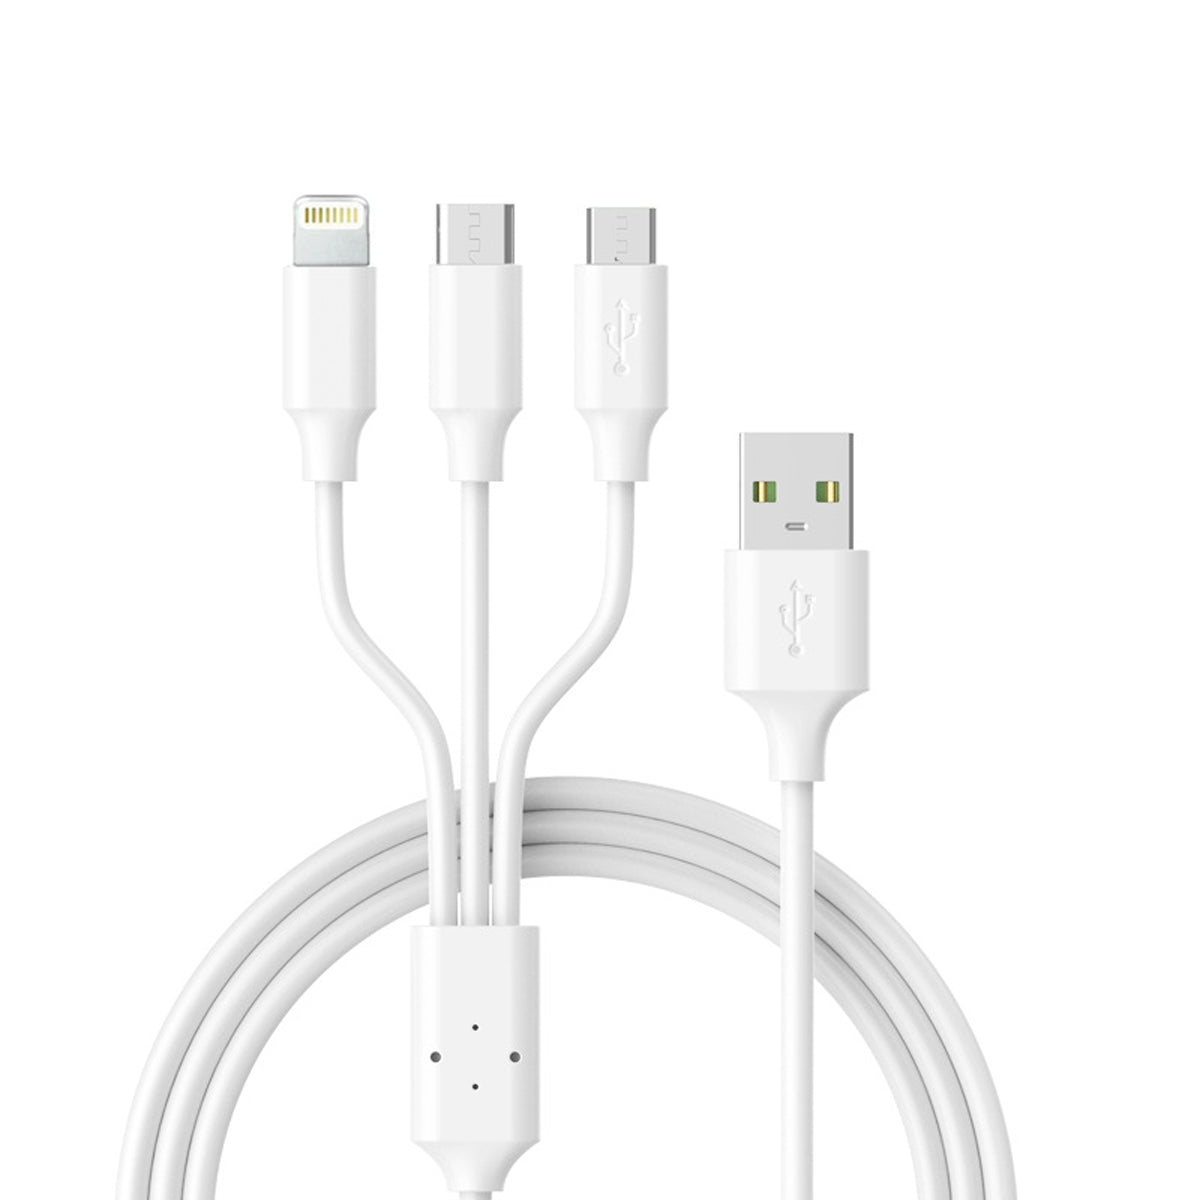 LA' FORTE 3 in 1 Charging Cable (Micro, C & Iphone Connectors)